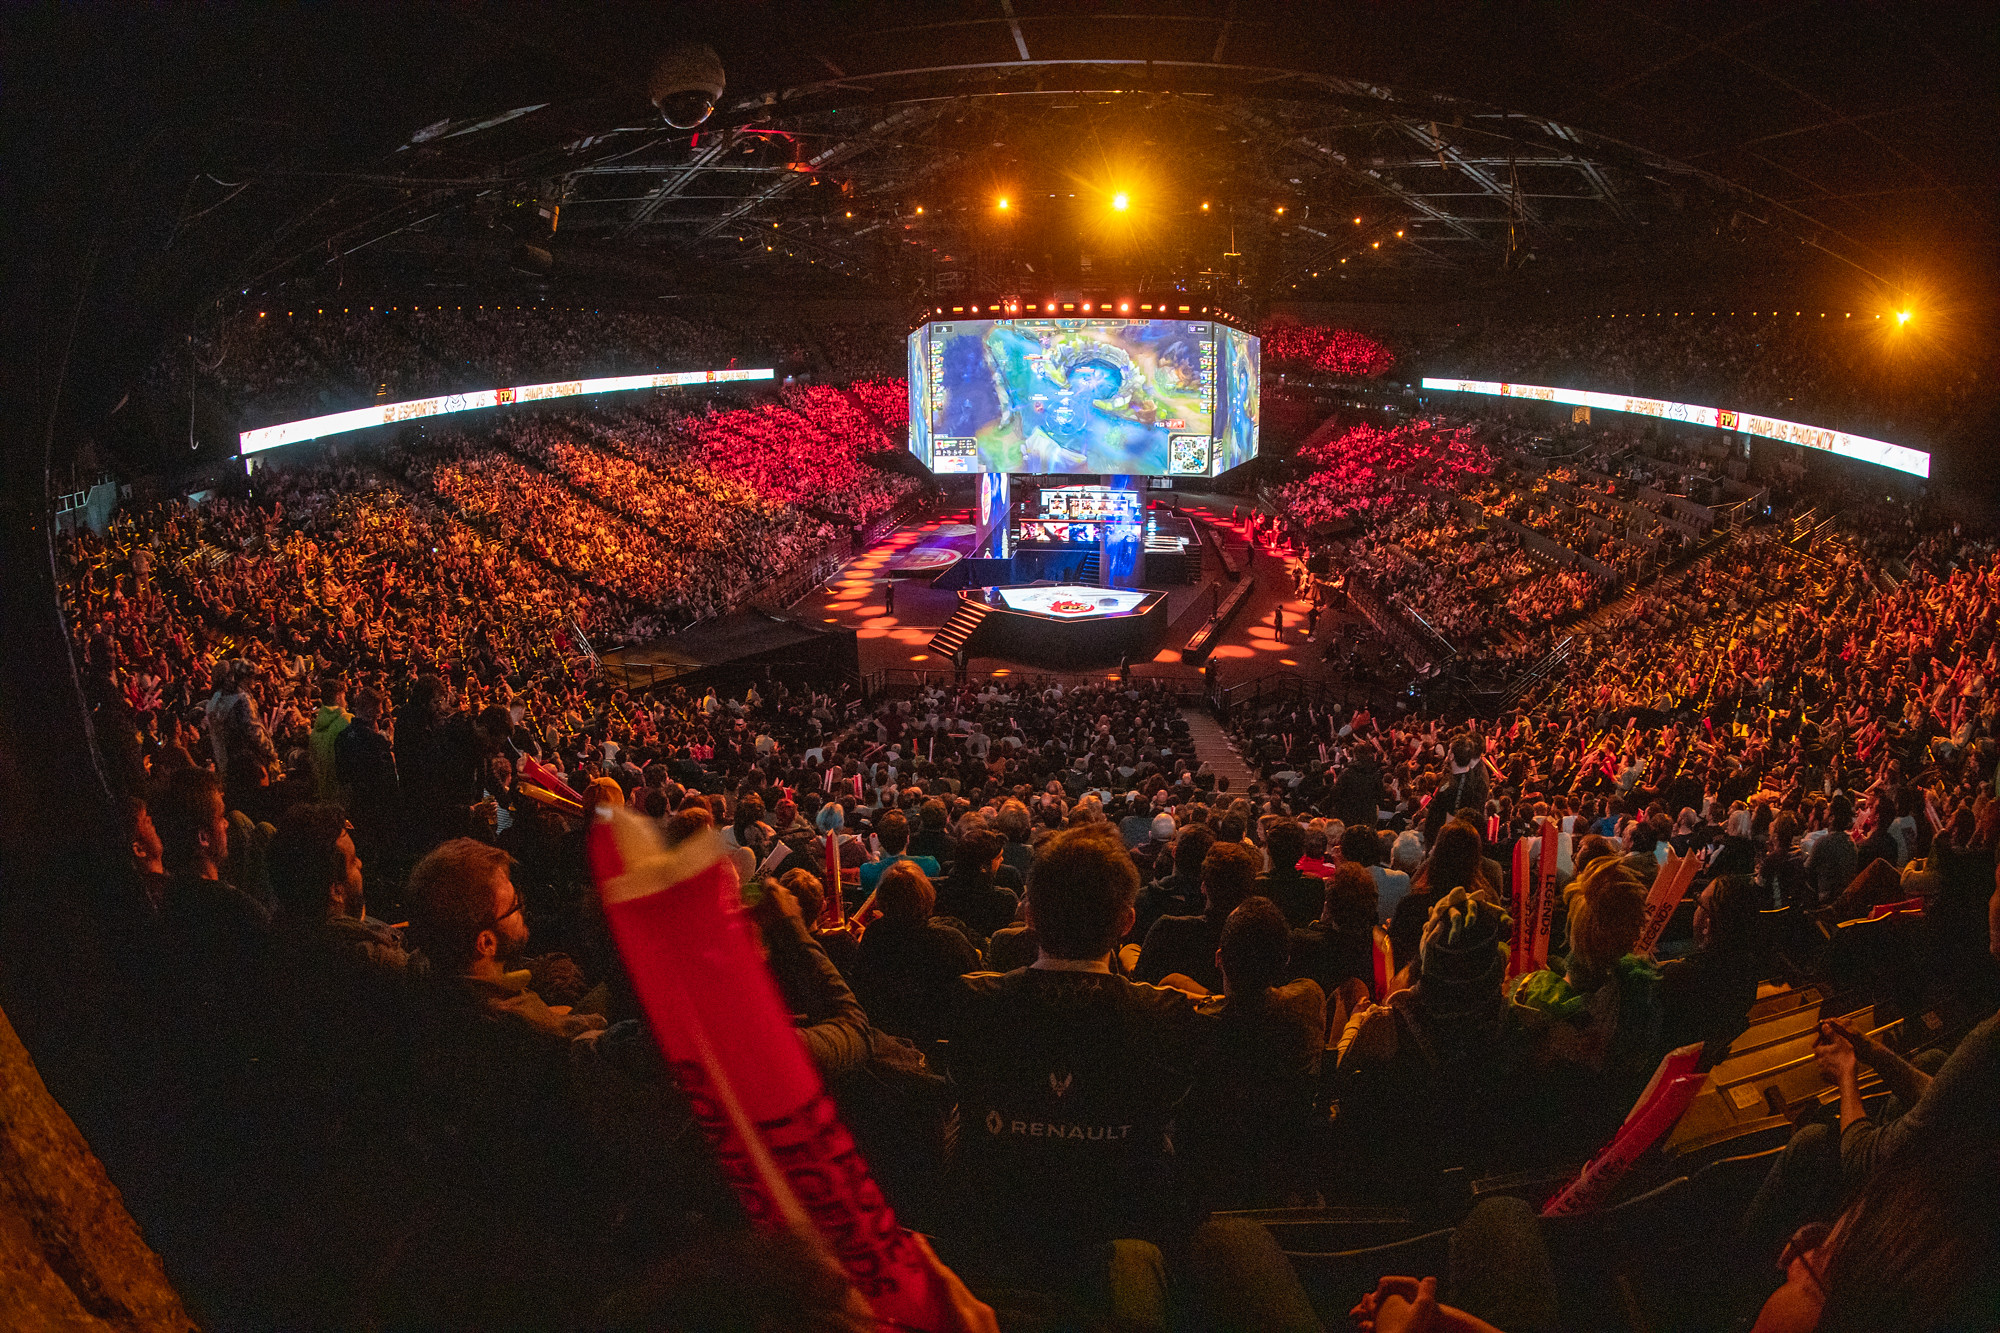 China’s e-sports market tops RMB 100 billion for the first time after official recognition boosts prospects